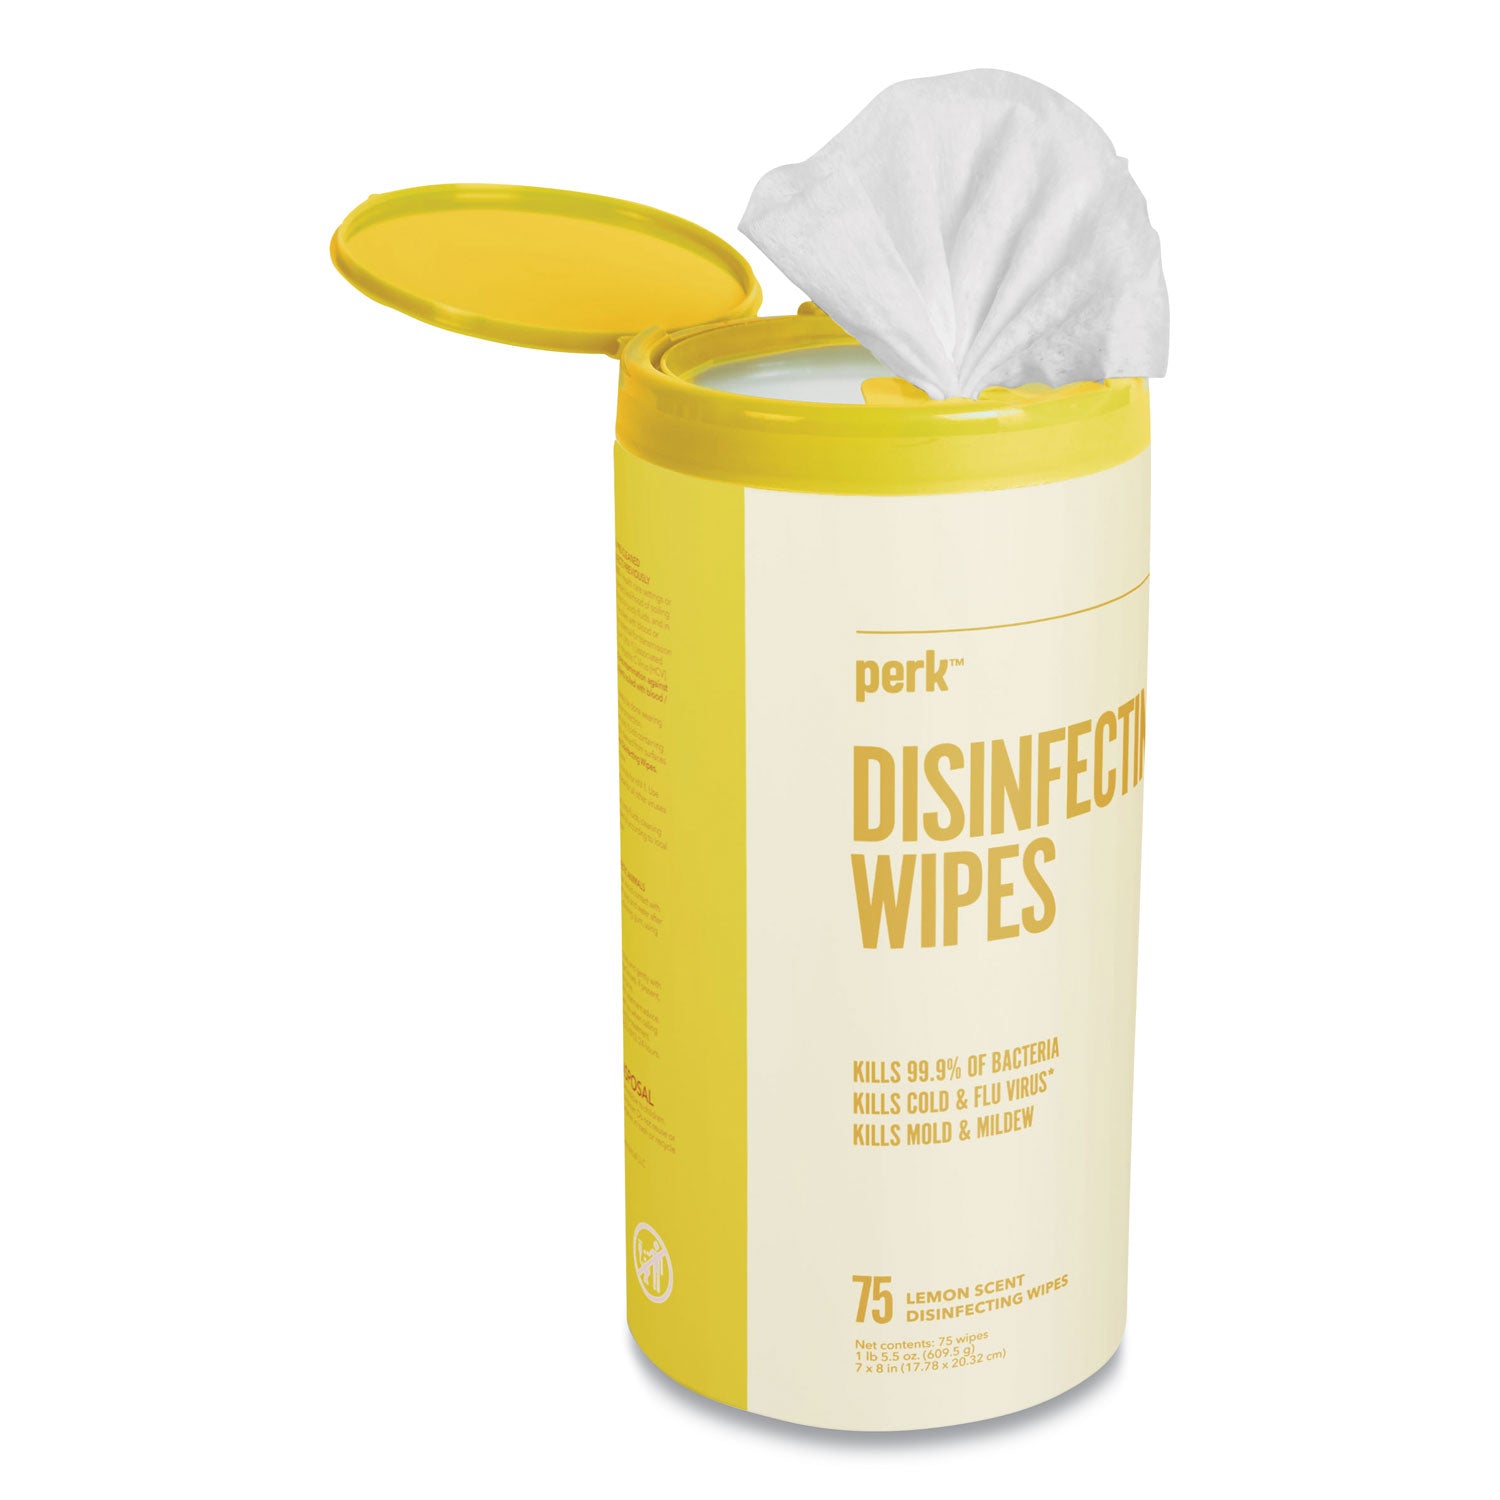 disinfecting-wipes-7-x-8-lemon-white-75-wipes-canister_prk24411134 - 1